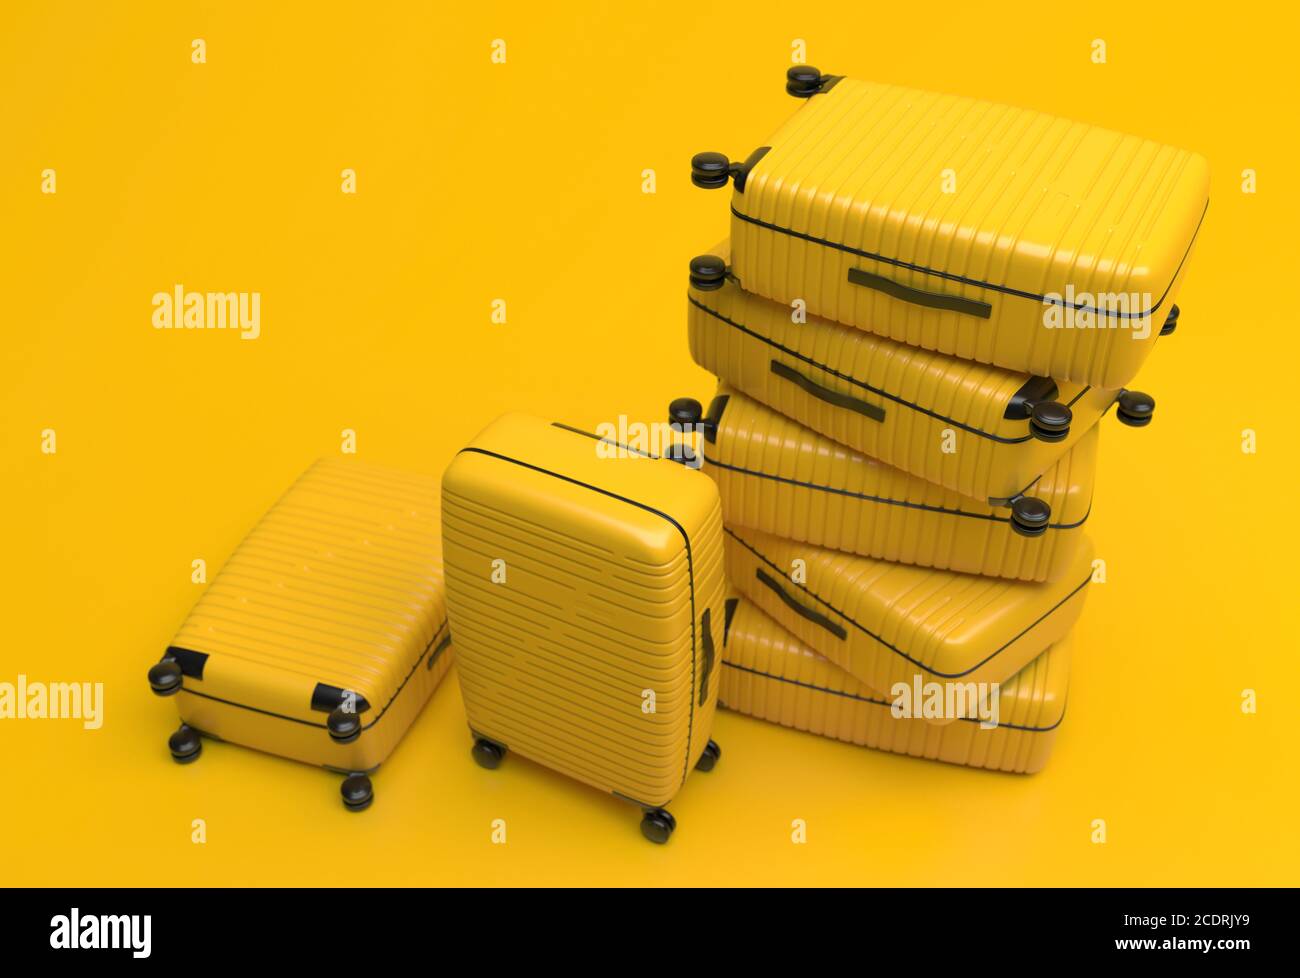 Many identical yellow suitcases on wheels stacked on top of each other. Travel bags are in a heap on a yellow background. 3D rendering illustration. C Stock Photo